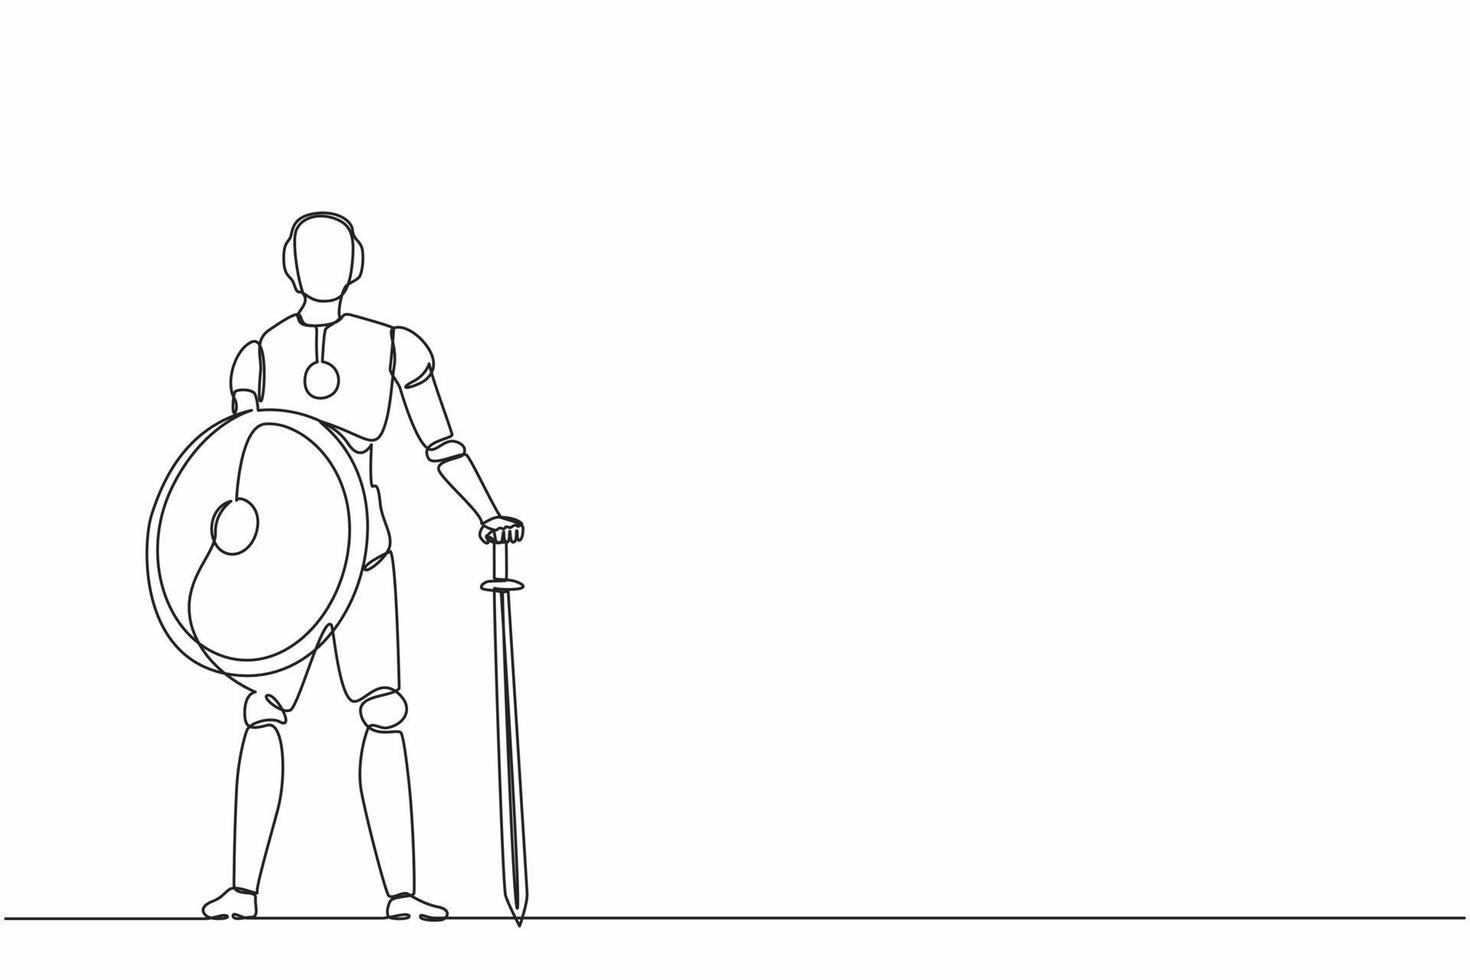 Continuous one line drawing robots stands holding big sword and shield. Humanoid robot cybernetic organism. Future robotics development concept. Single line draw design vector graphic illustration